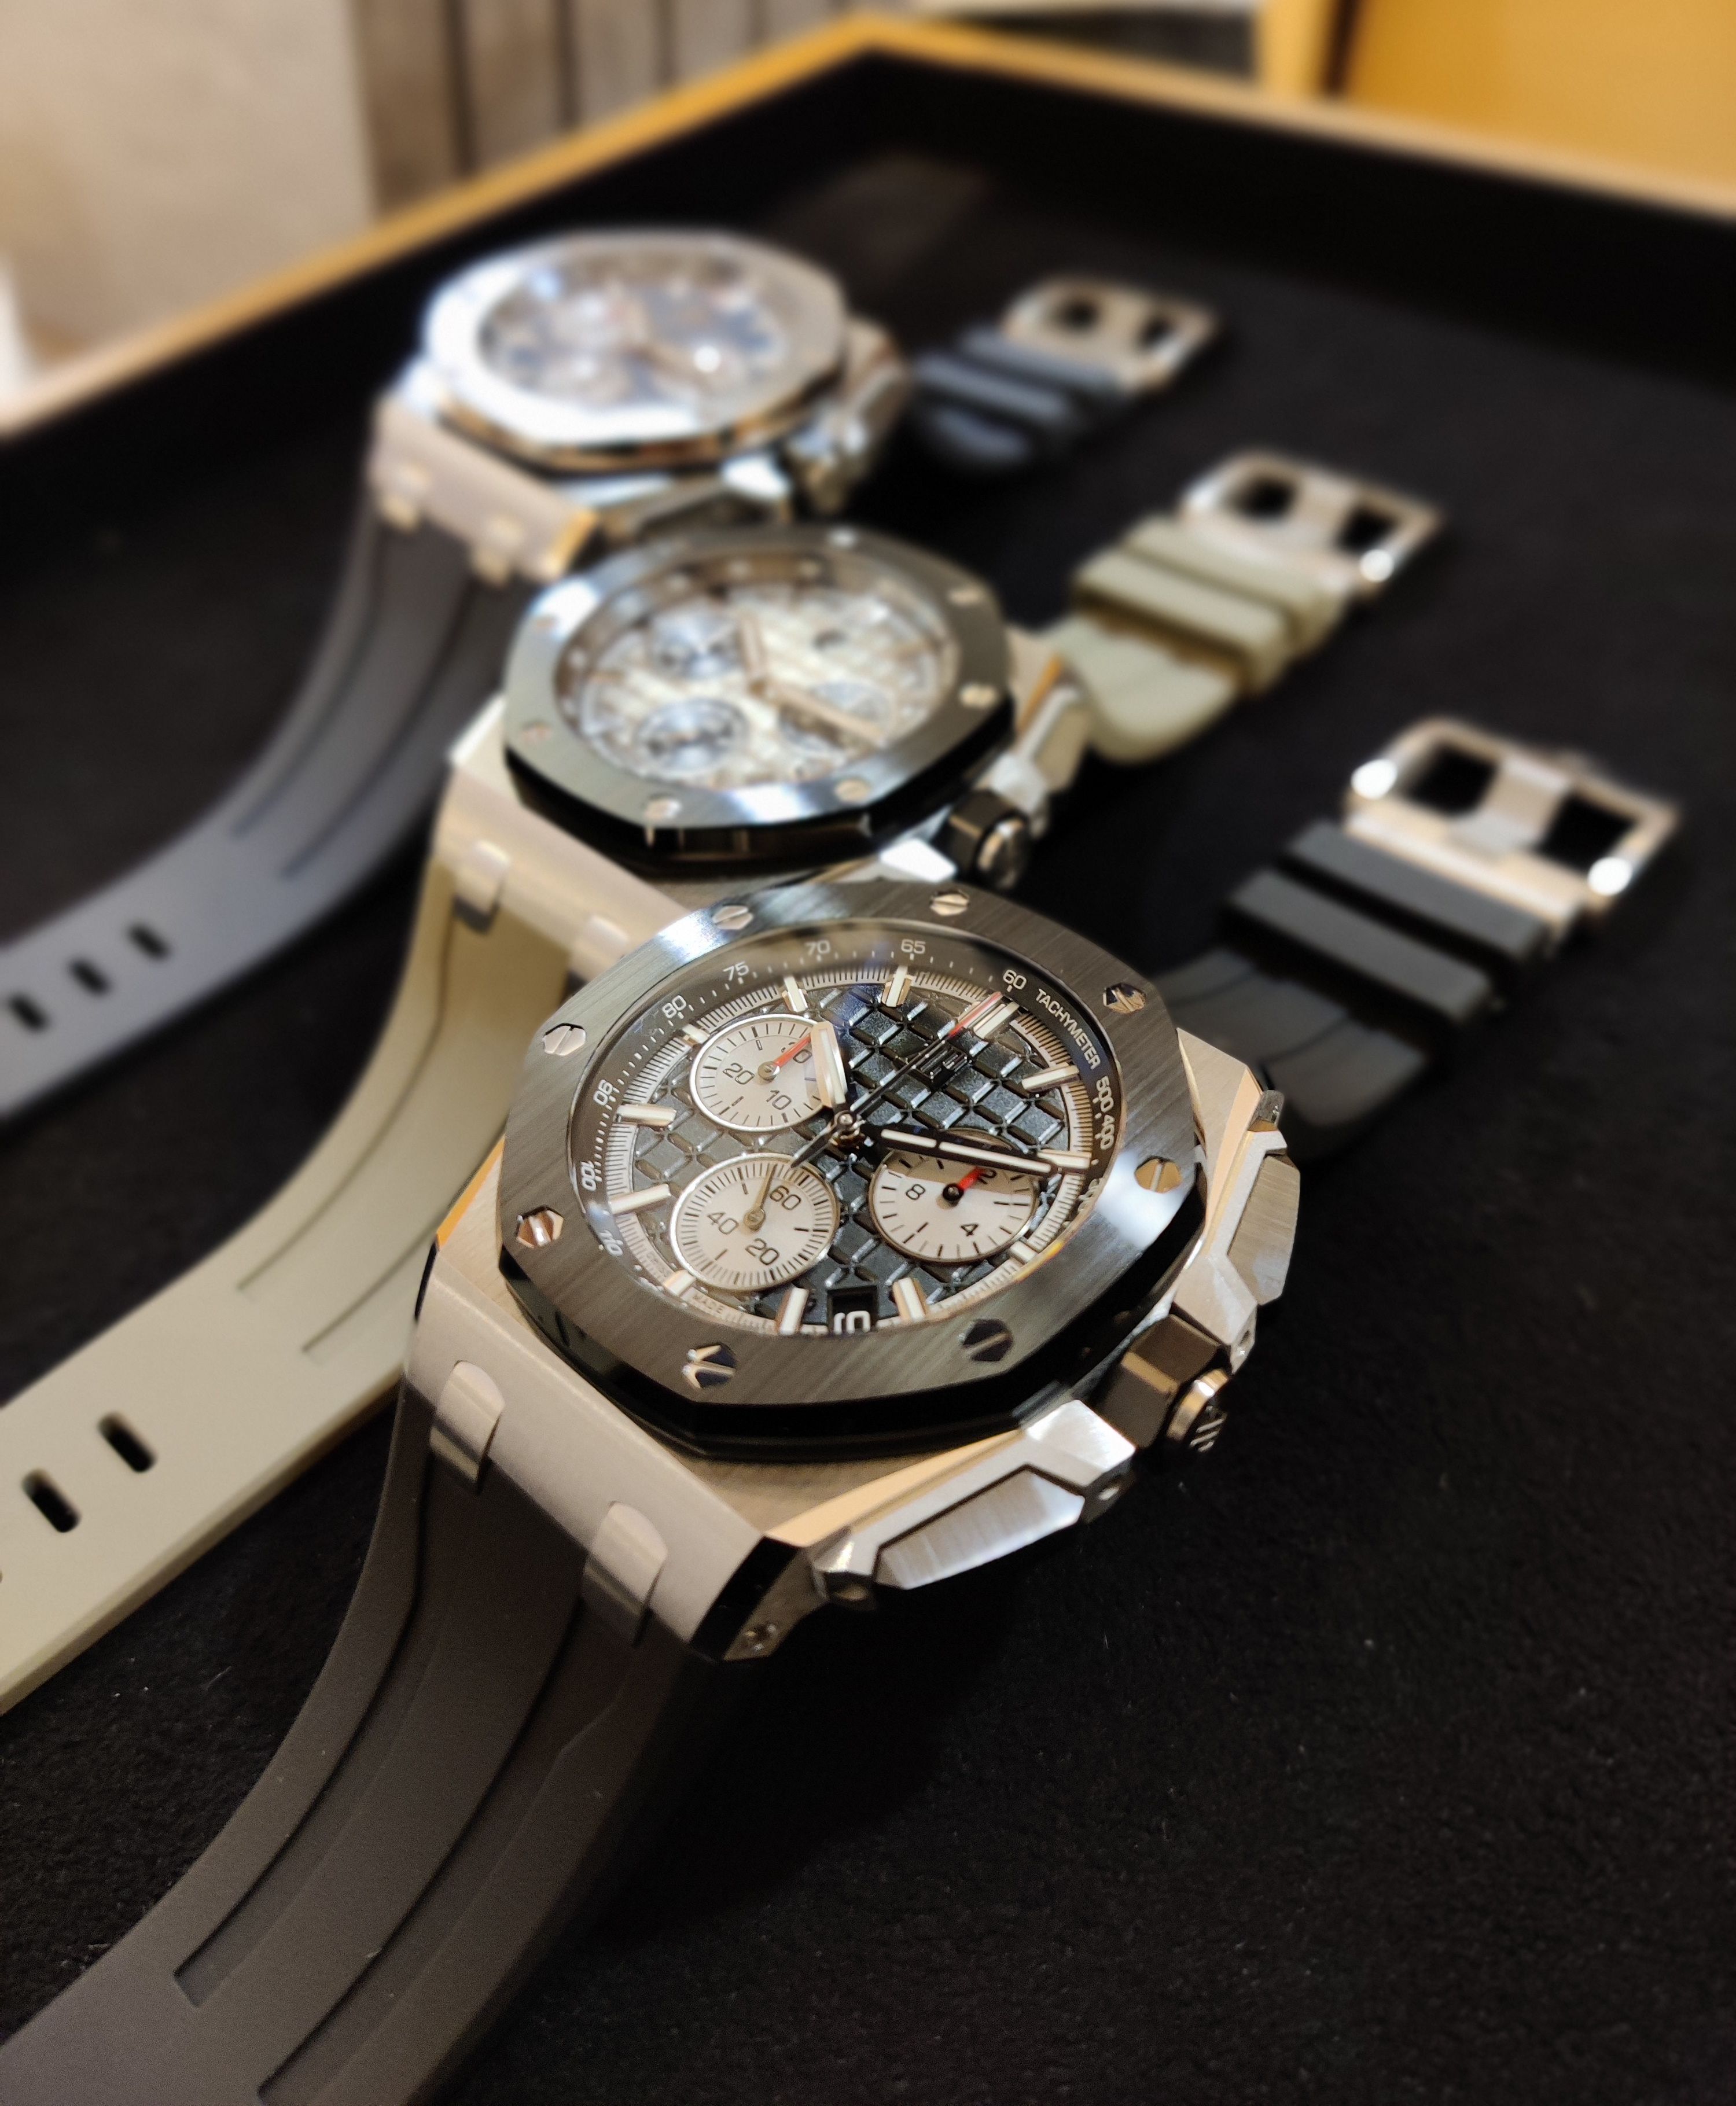 We tried the new Audemars Piguet 43mm Royal Oak Offshore Flyback